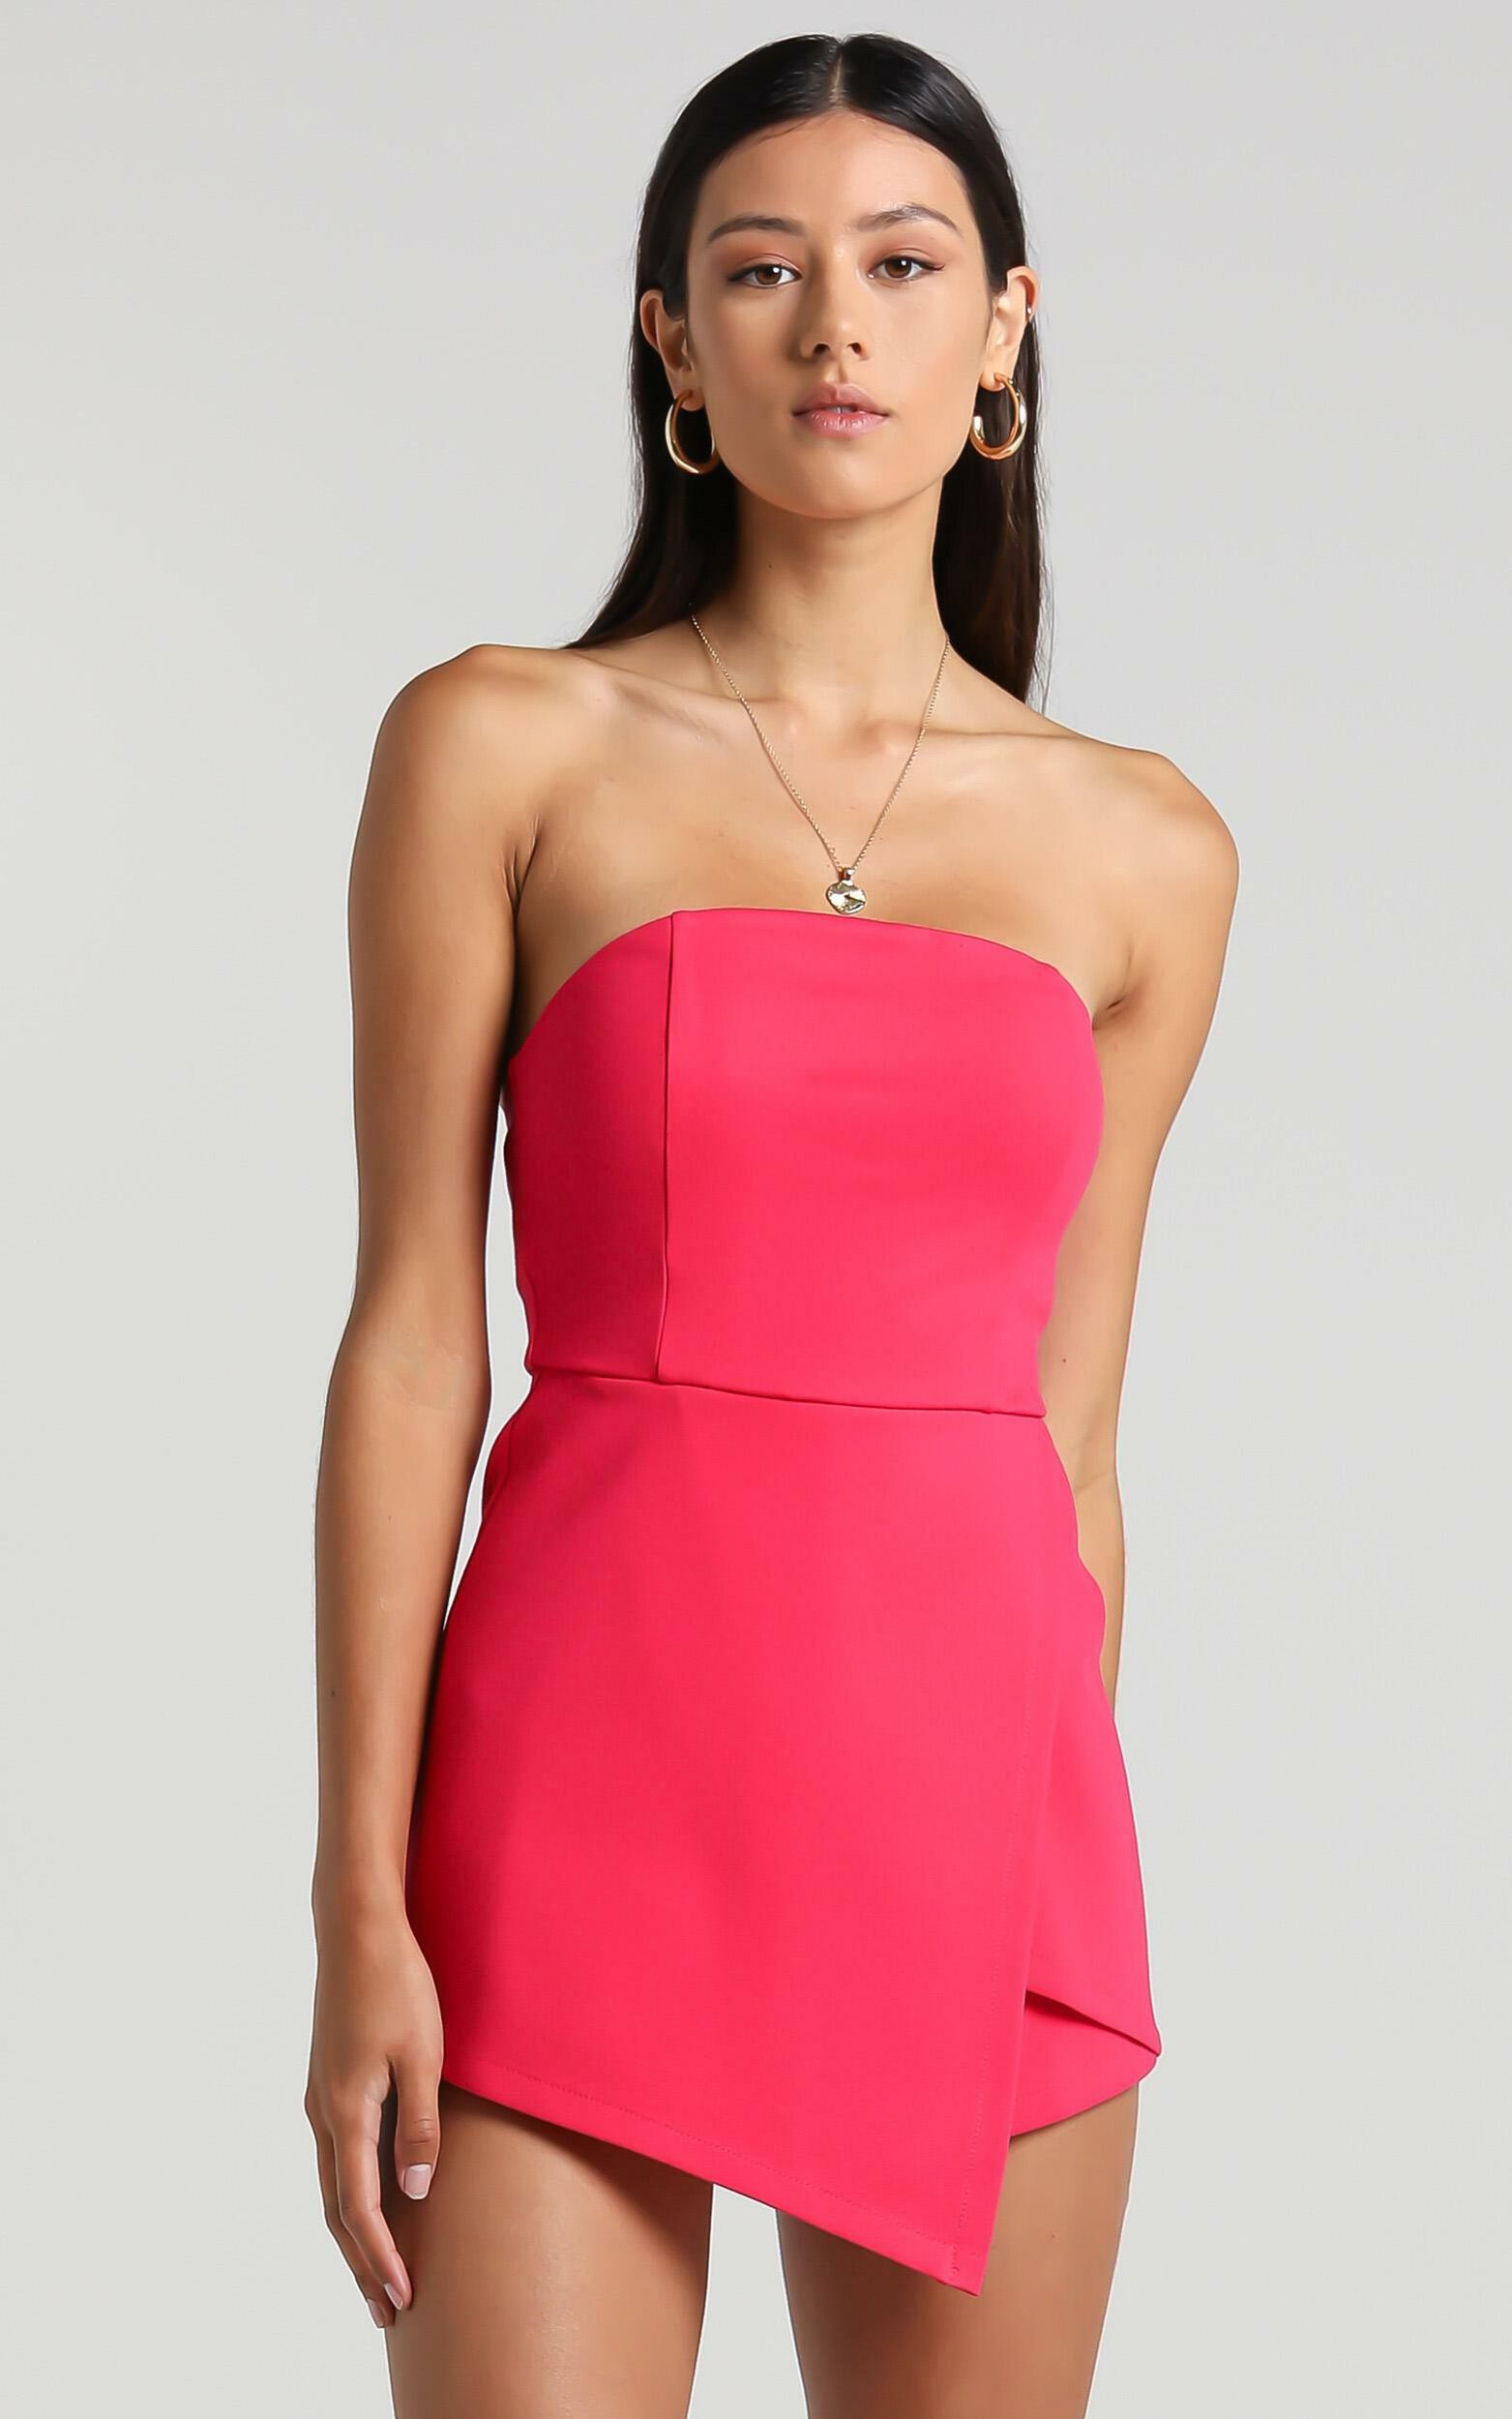 Caught My Eyes Playsuit In Pink Showpo Usa 0459